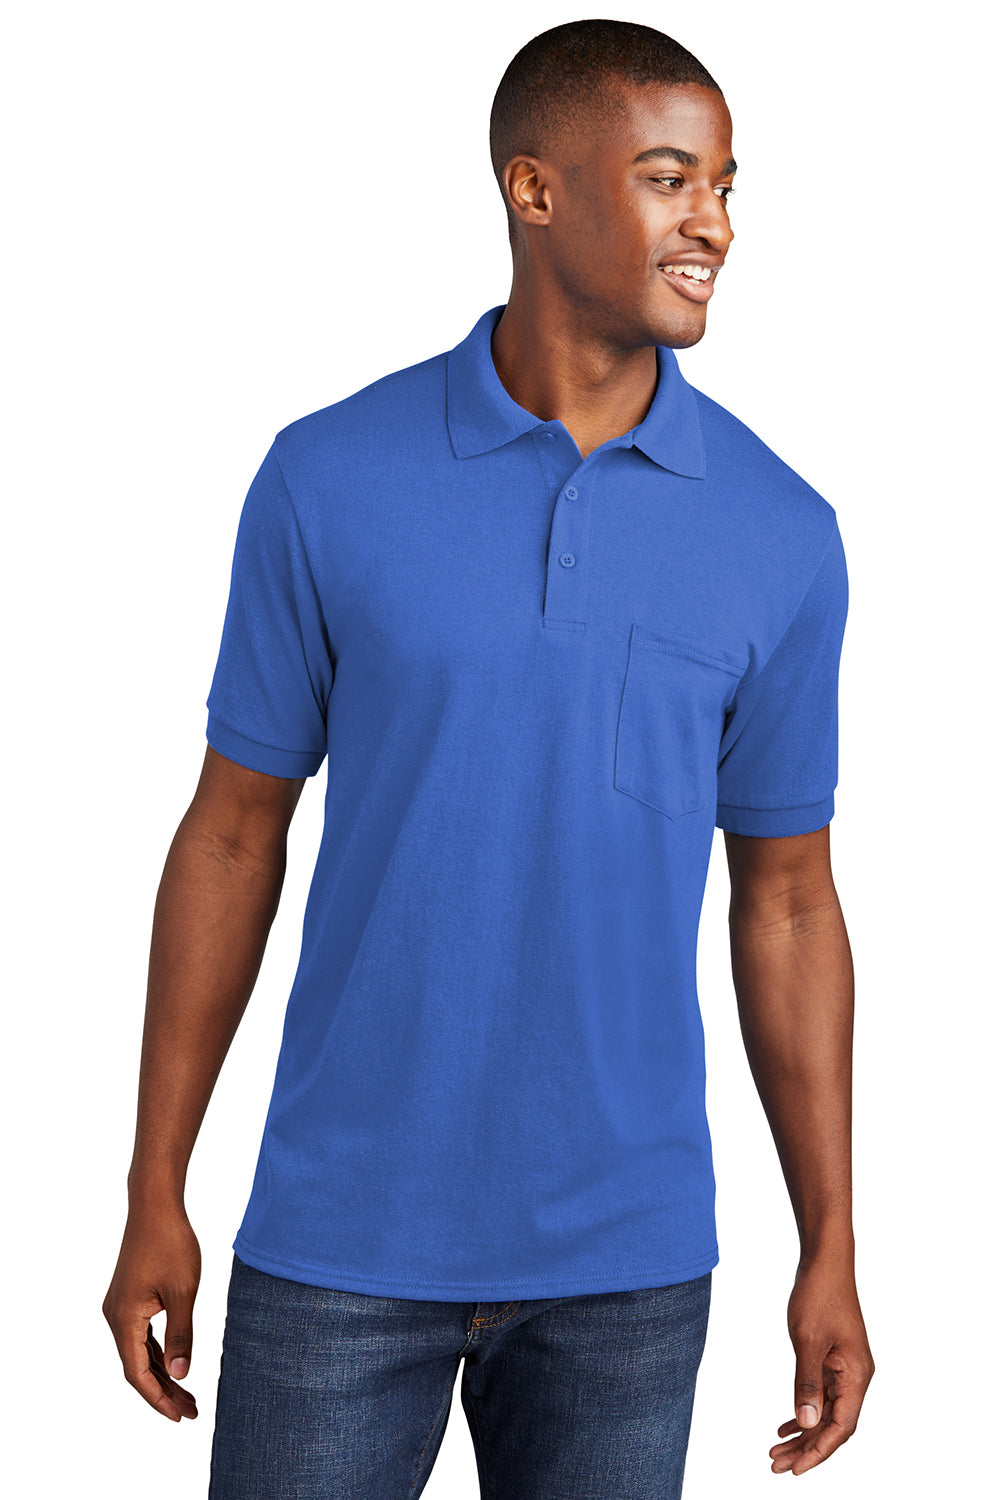 Port & Company KP55P Mens Core Stain Resistant Short Sleeve Polo Shirt w/ Pocket Royal Blue Front